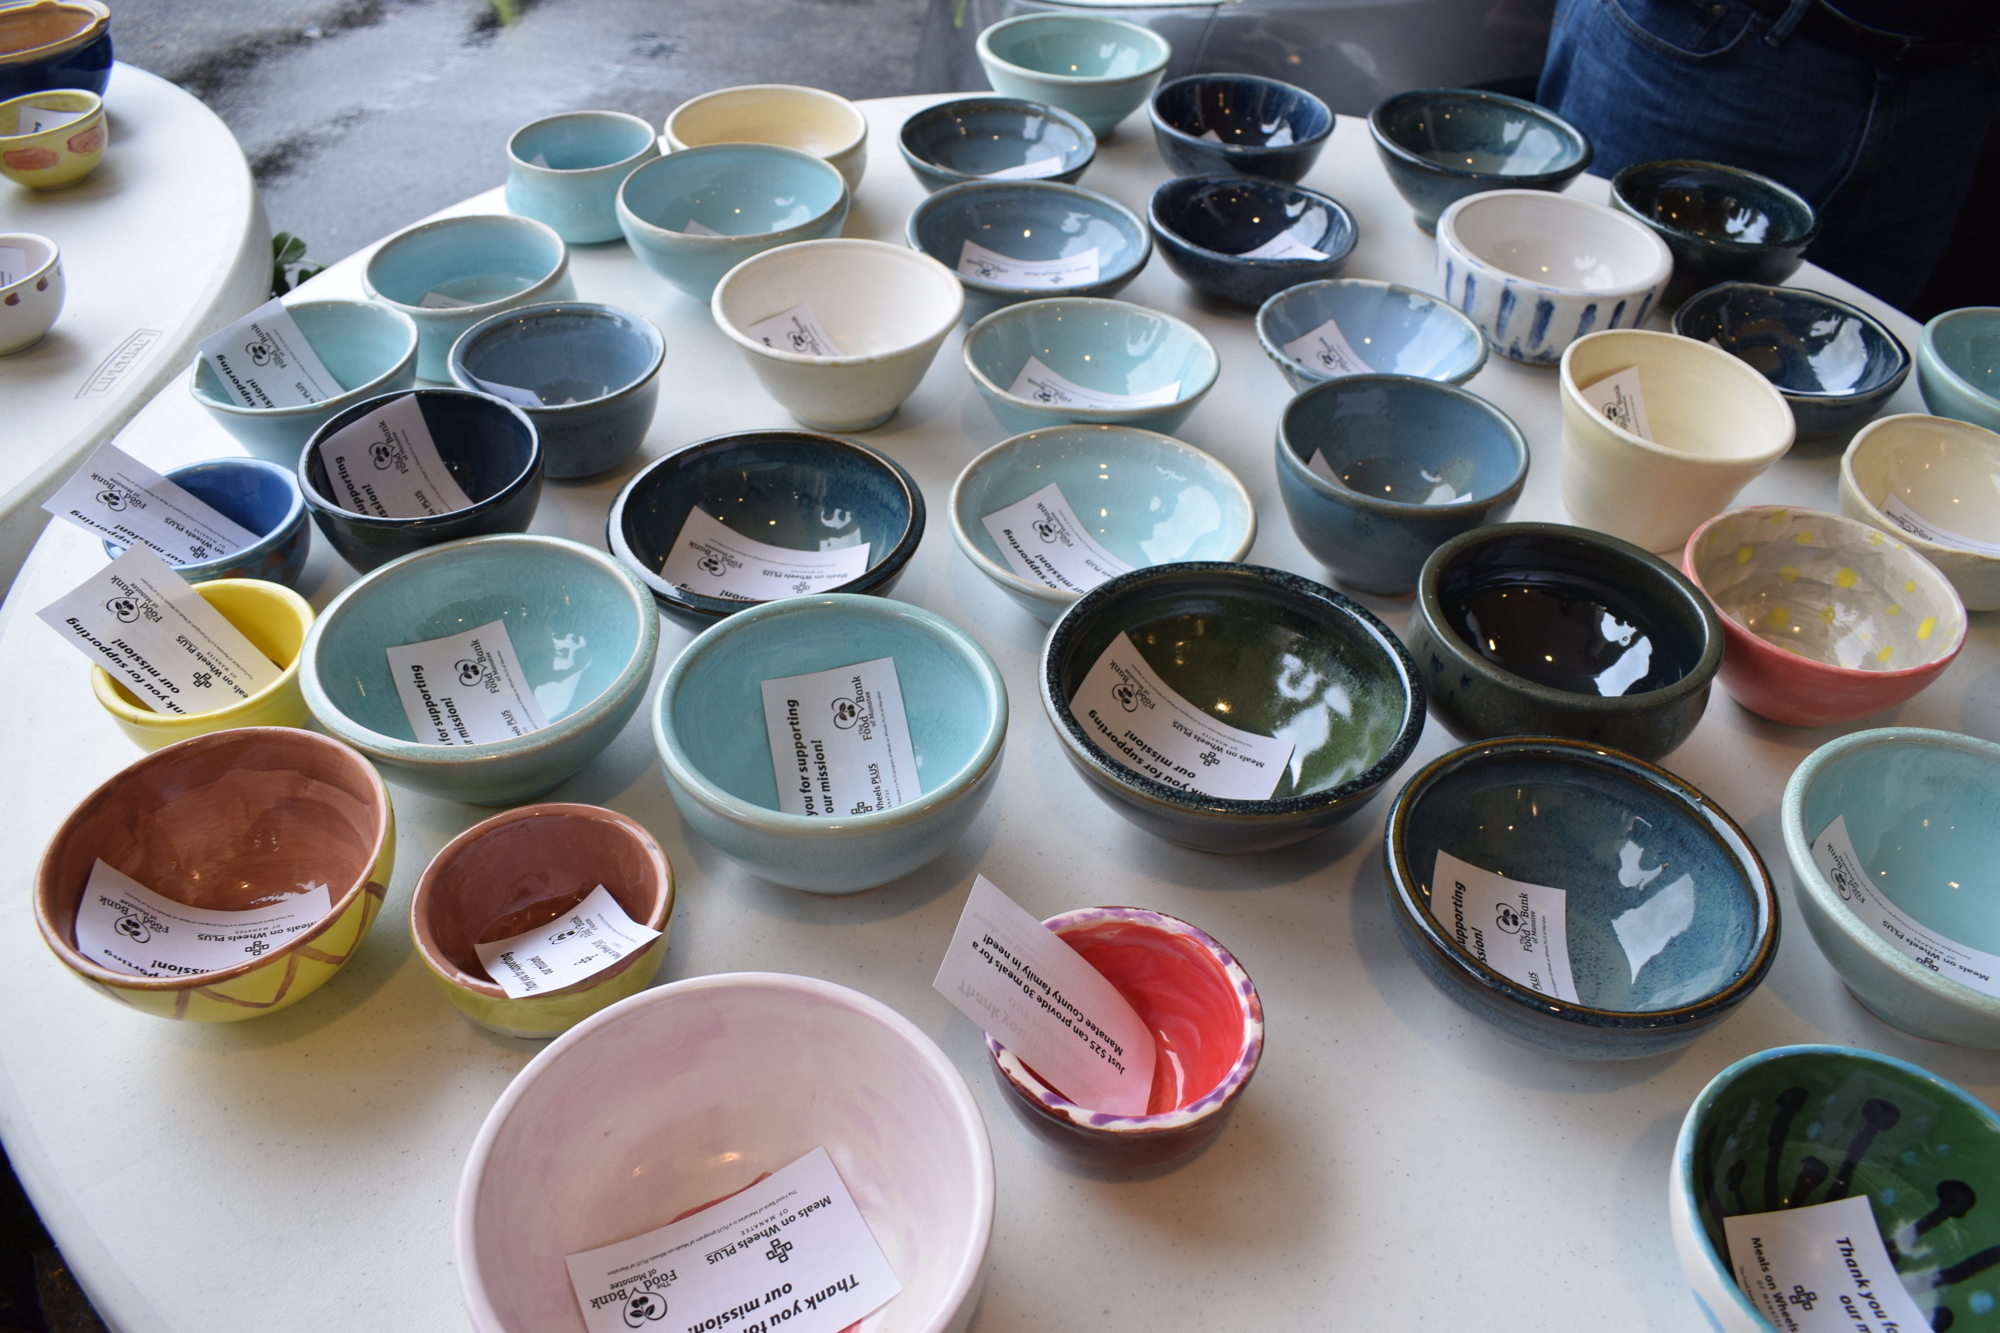 Attendees at the 2021 Empty Bowls event each received a handmade ceramic bowl. (File photo)